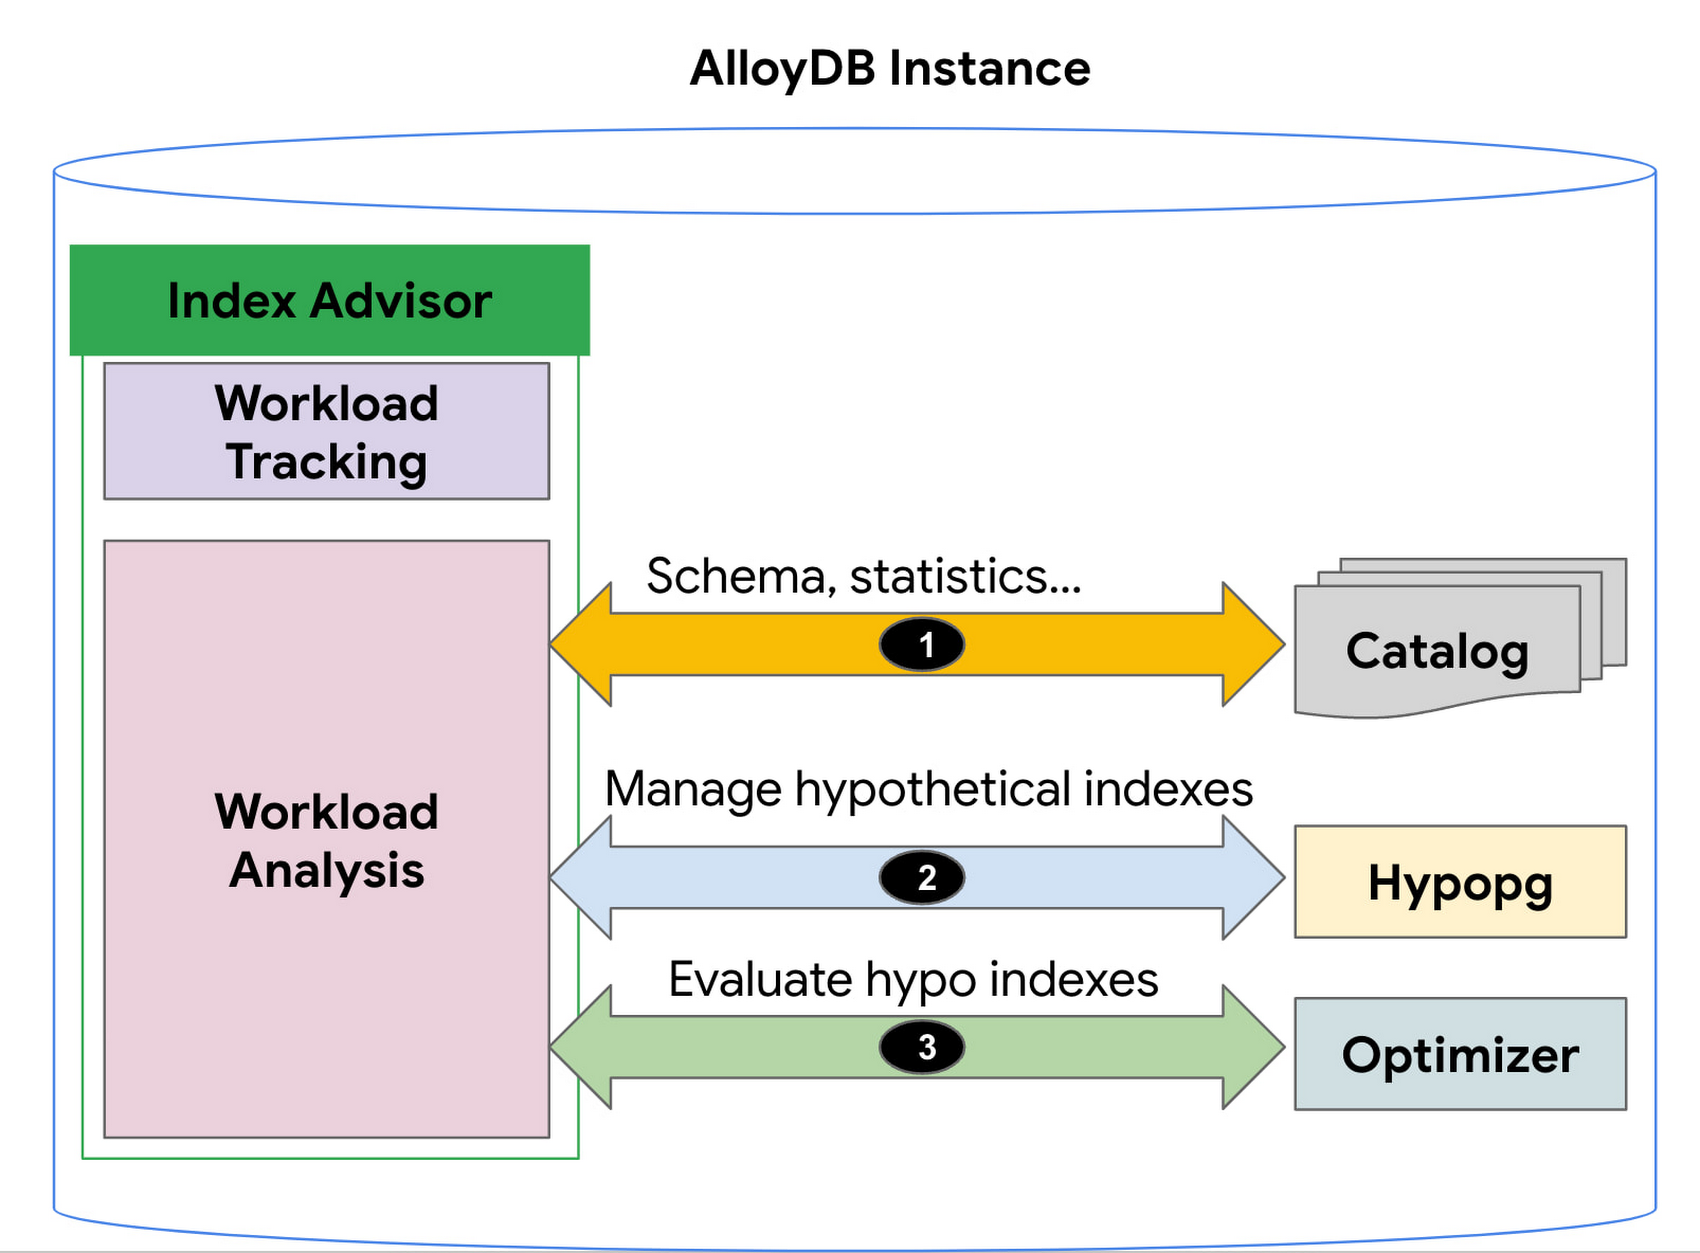 Overview of the AlloyDB Index Advisor feature and how to use it